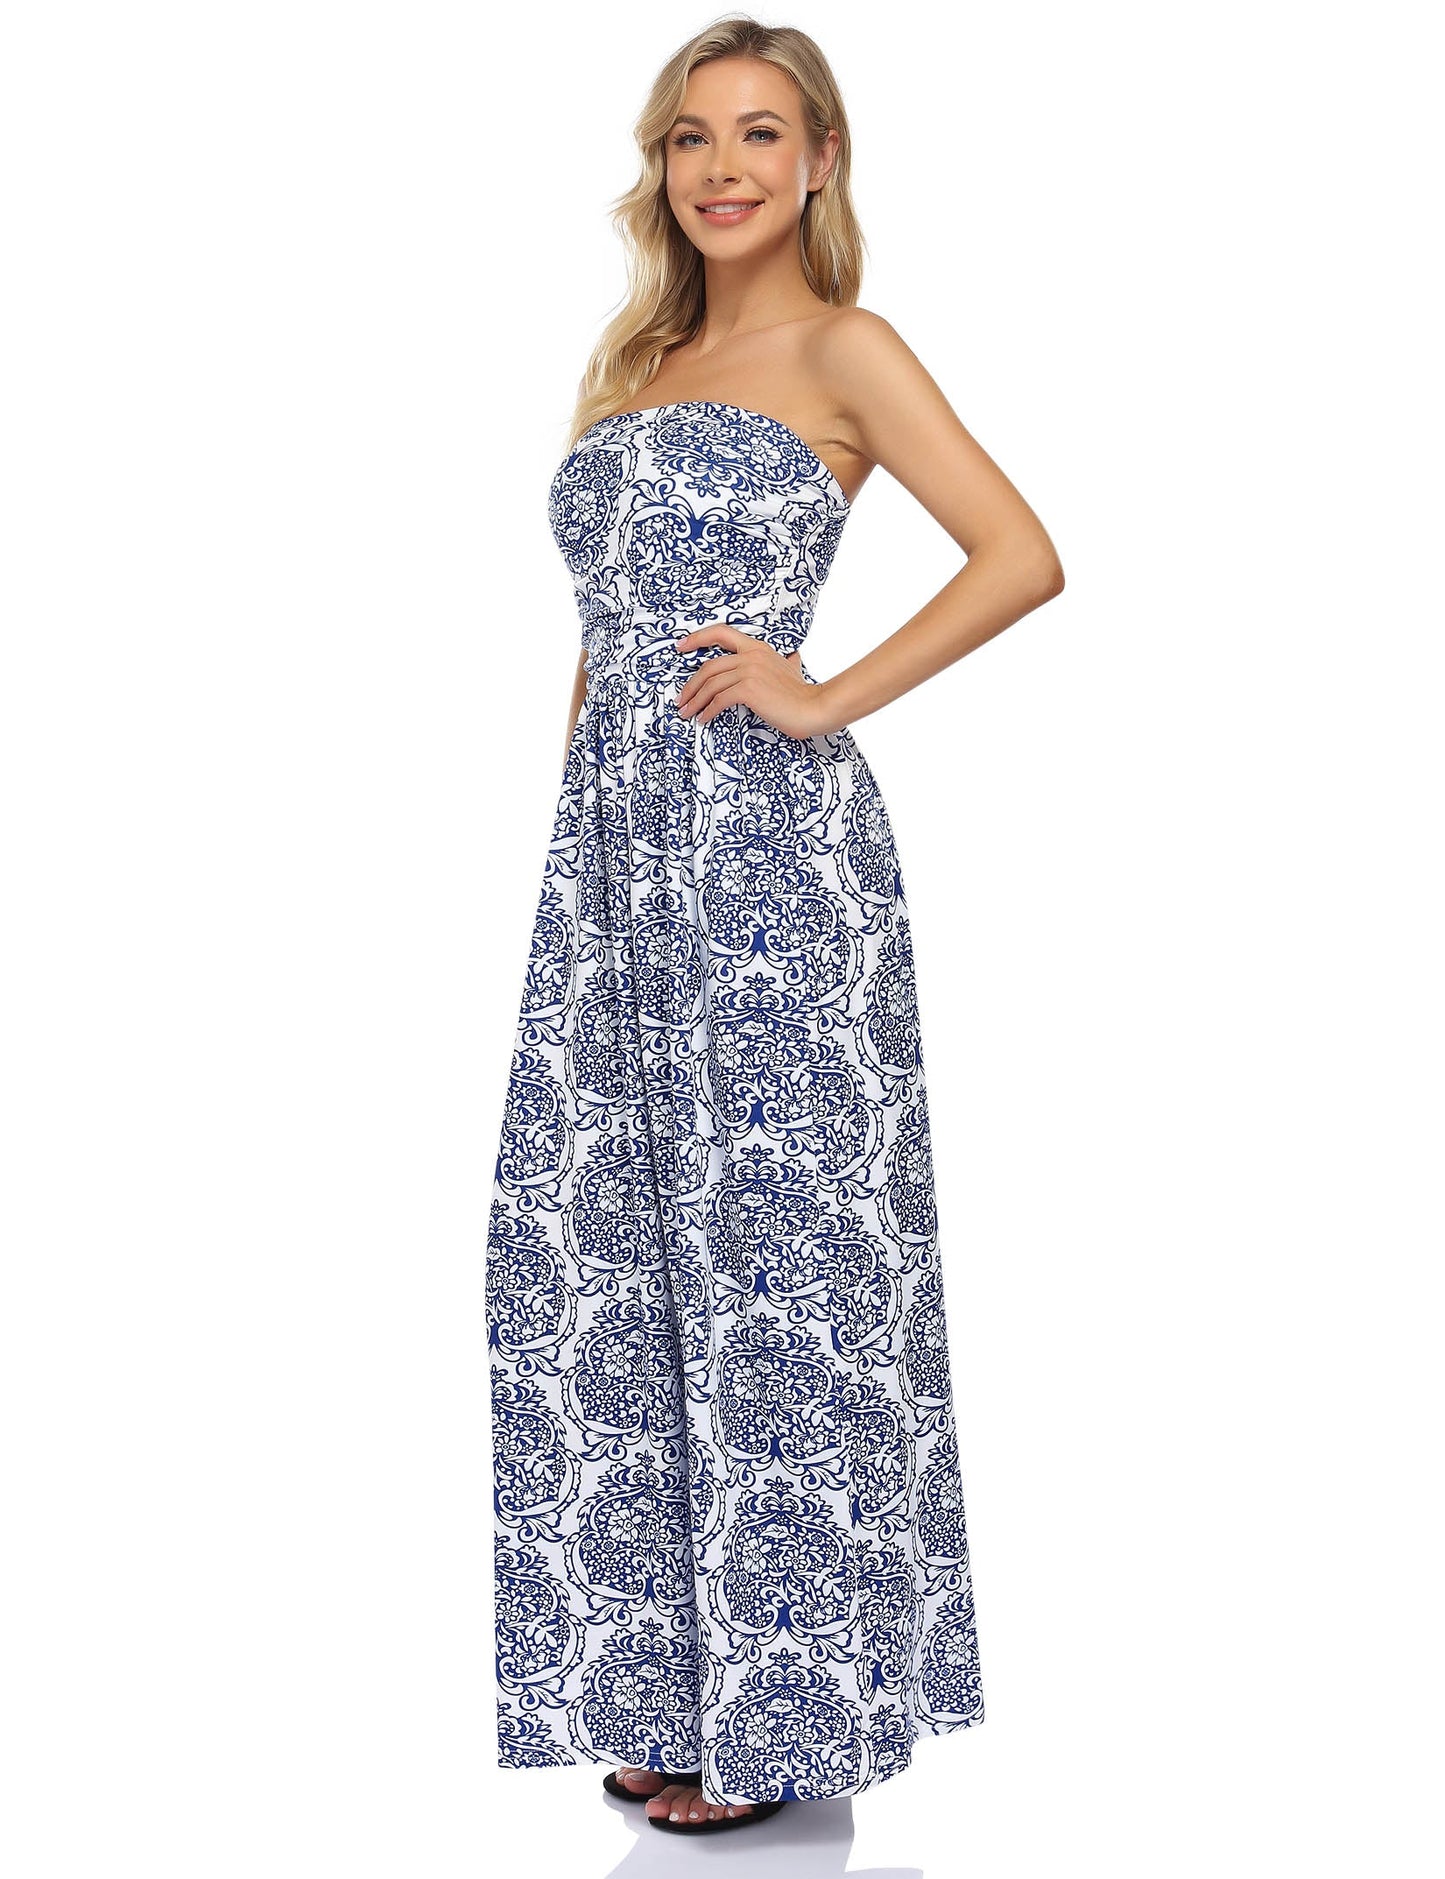 YESFASHION Women's Strapless Graceful Floral Party Maxi Long Dress White